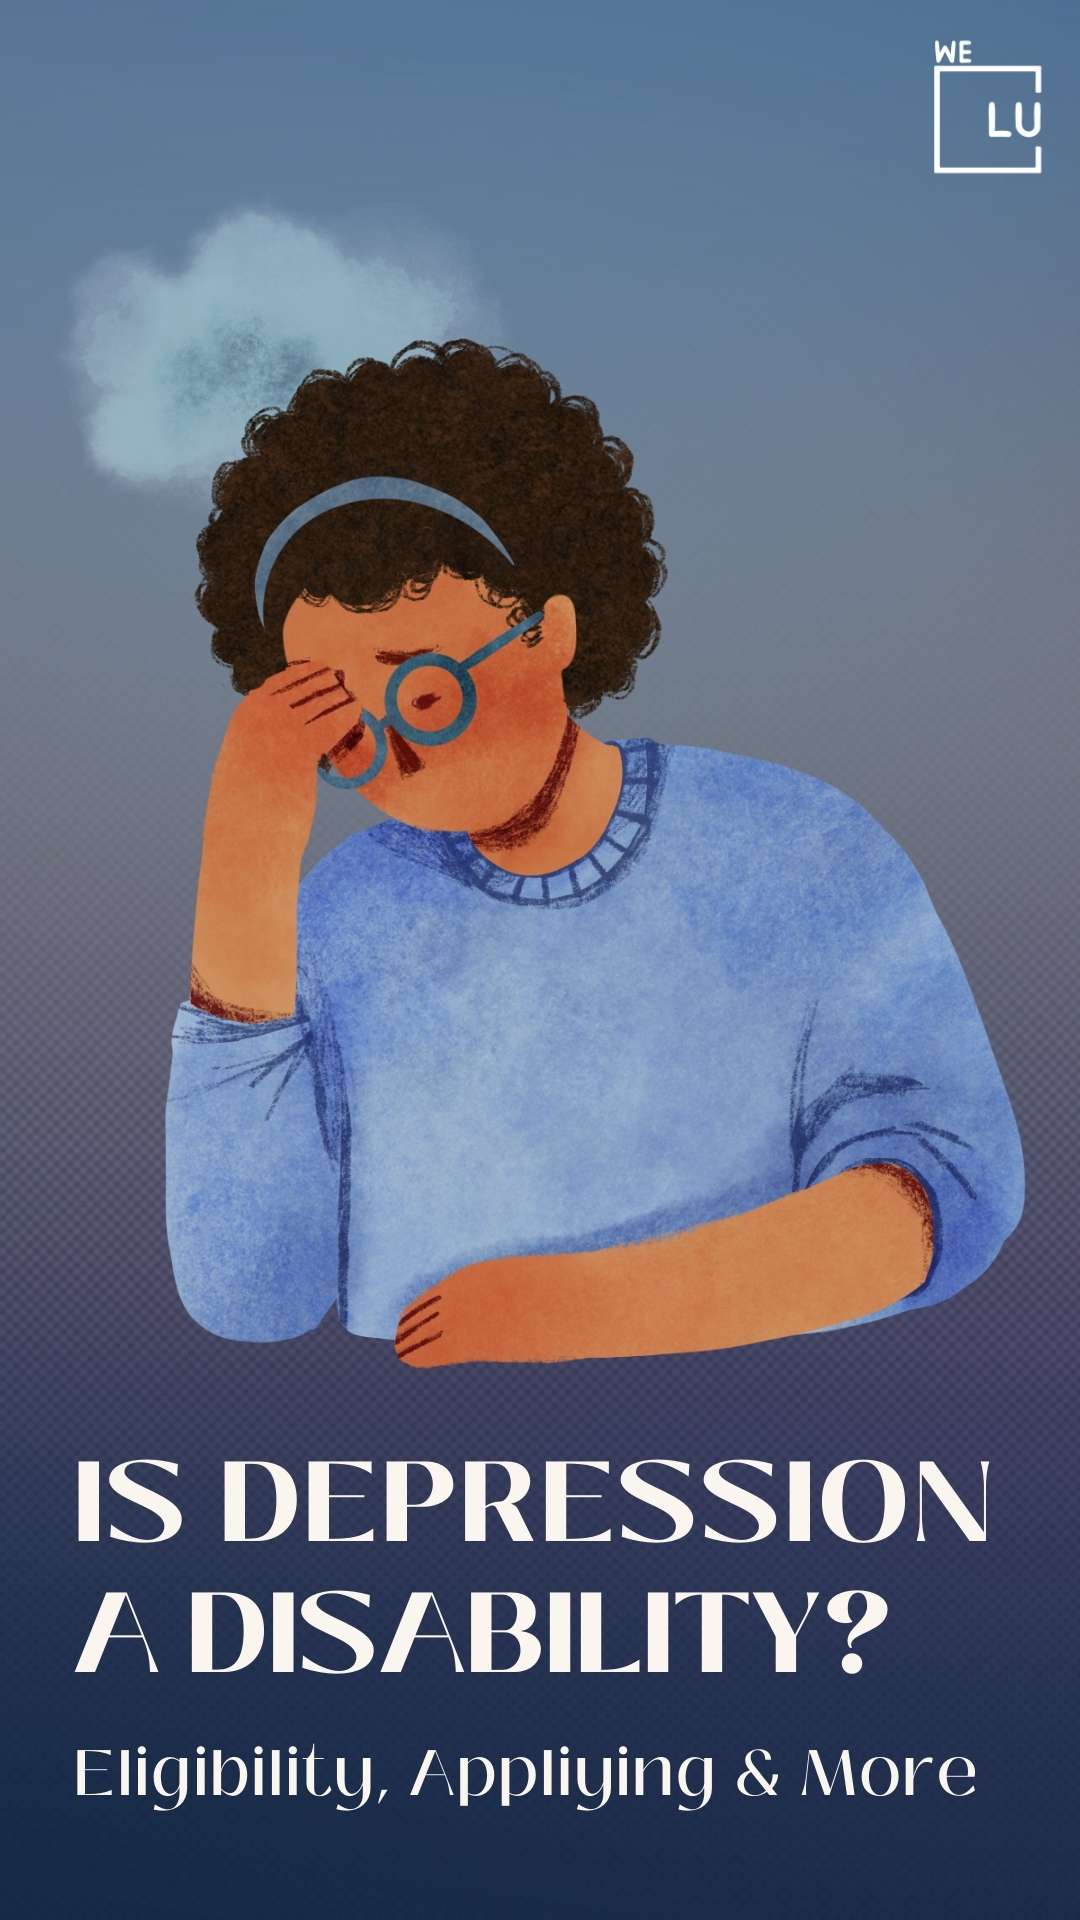 Yes. If you have depression that meddles with your ability to work, you may be eligible for Social Security disability benefits. Treatments of depression will vary for each person depending on individual needs, though the best major depression disorder treatments are often thought to be a combination of medication and therapy. Contact We Level Up for depression treatment resources and more.